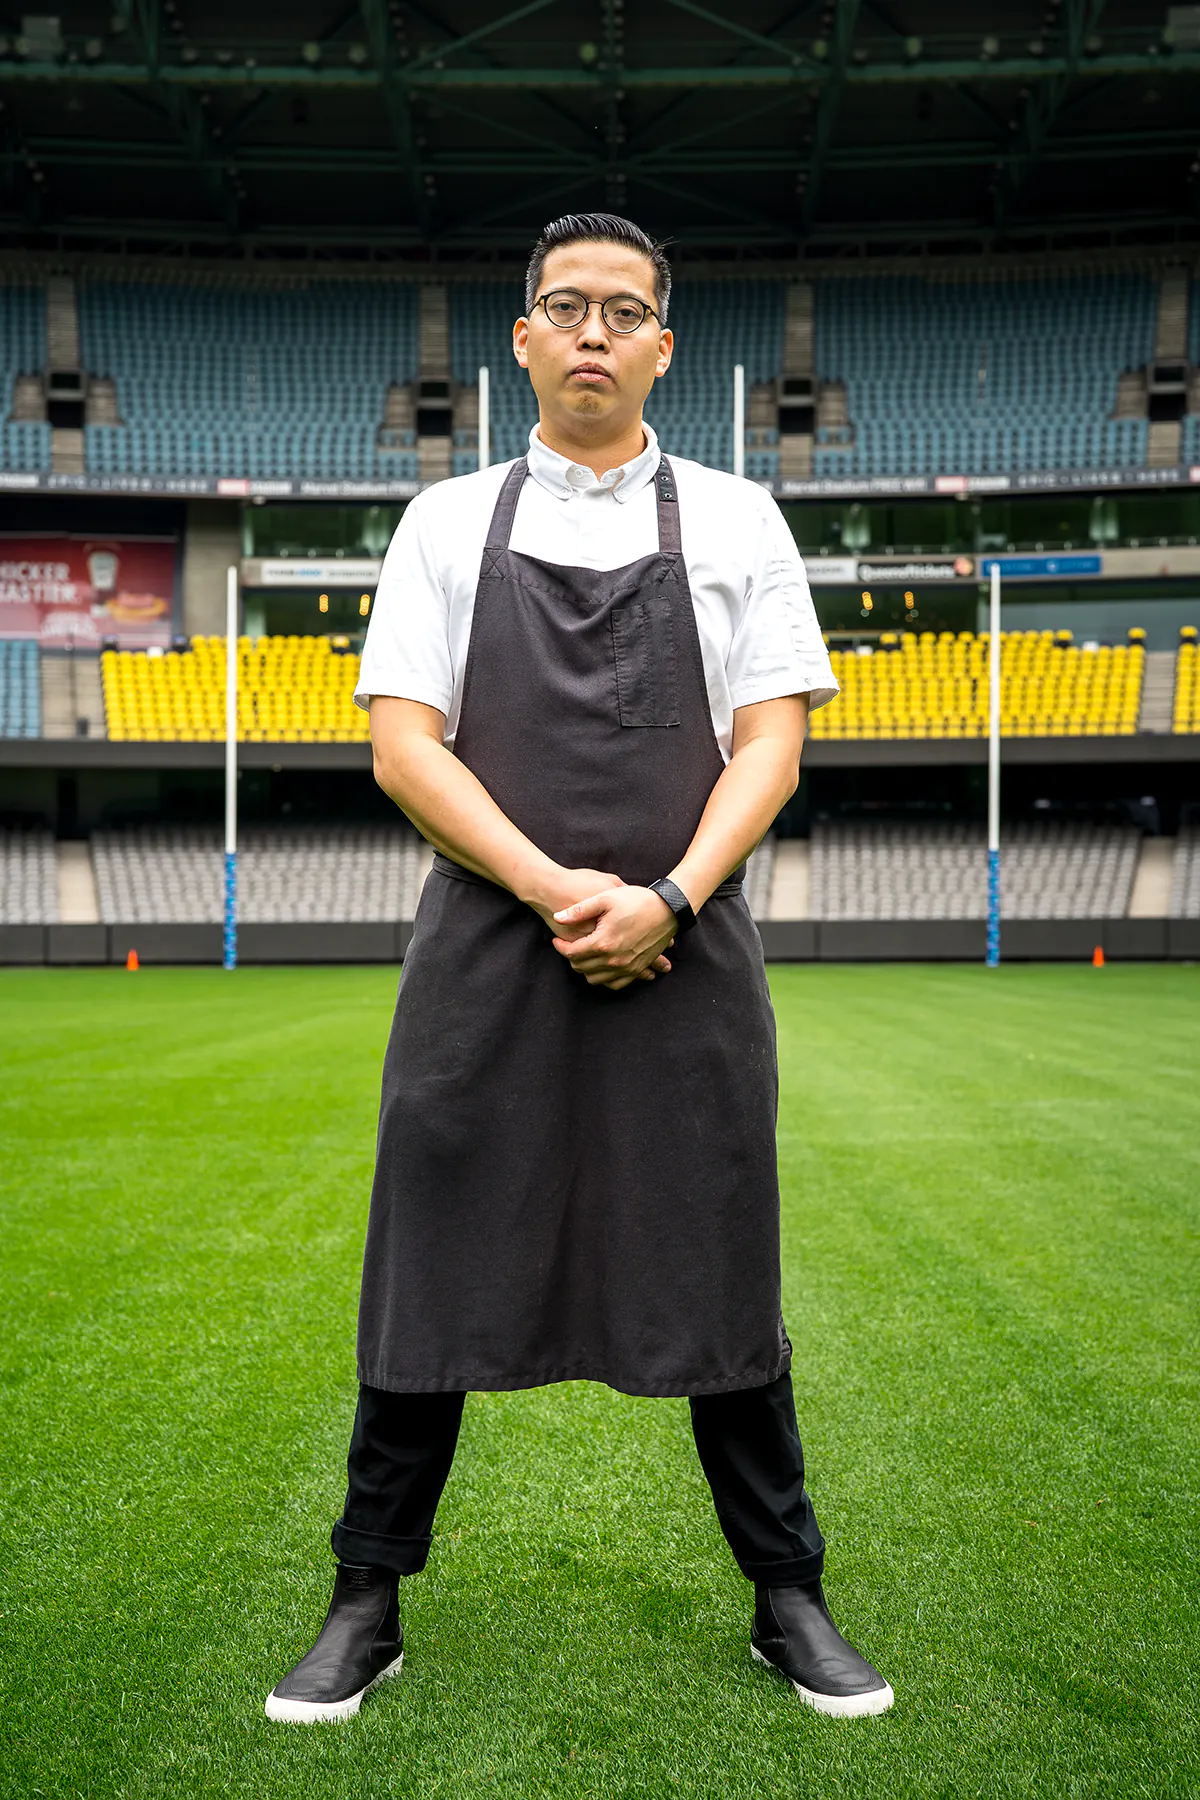 Victor Liong’s renowned Melbourne restaurant Lee Ho Fook now has an outlet at Marvel Stadium - Photo: TJ Edwards